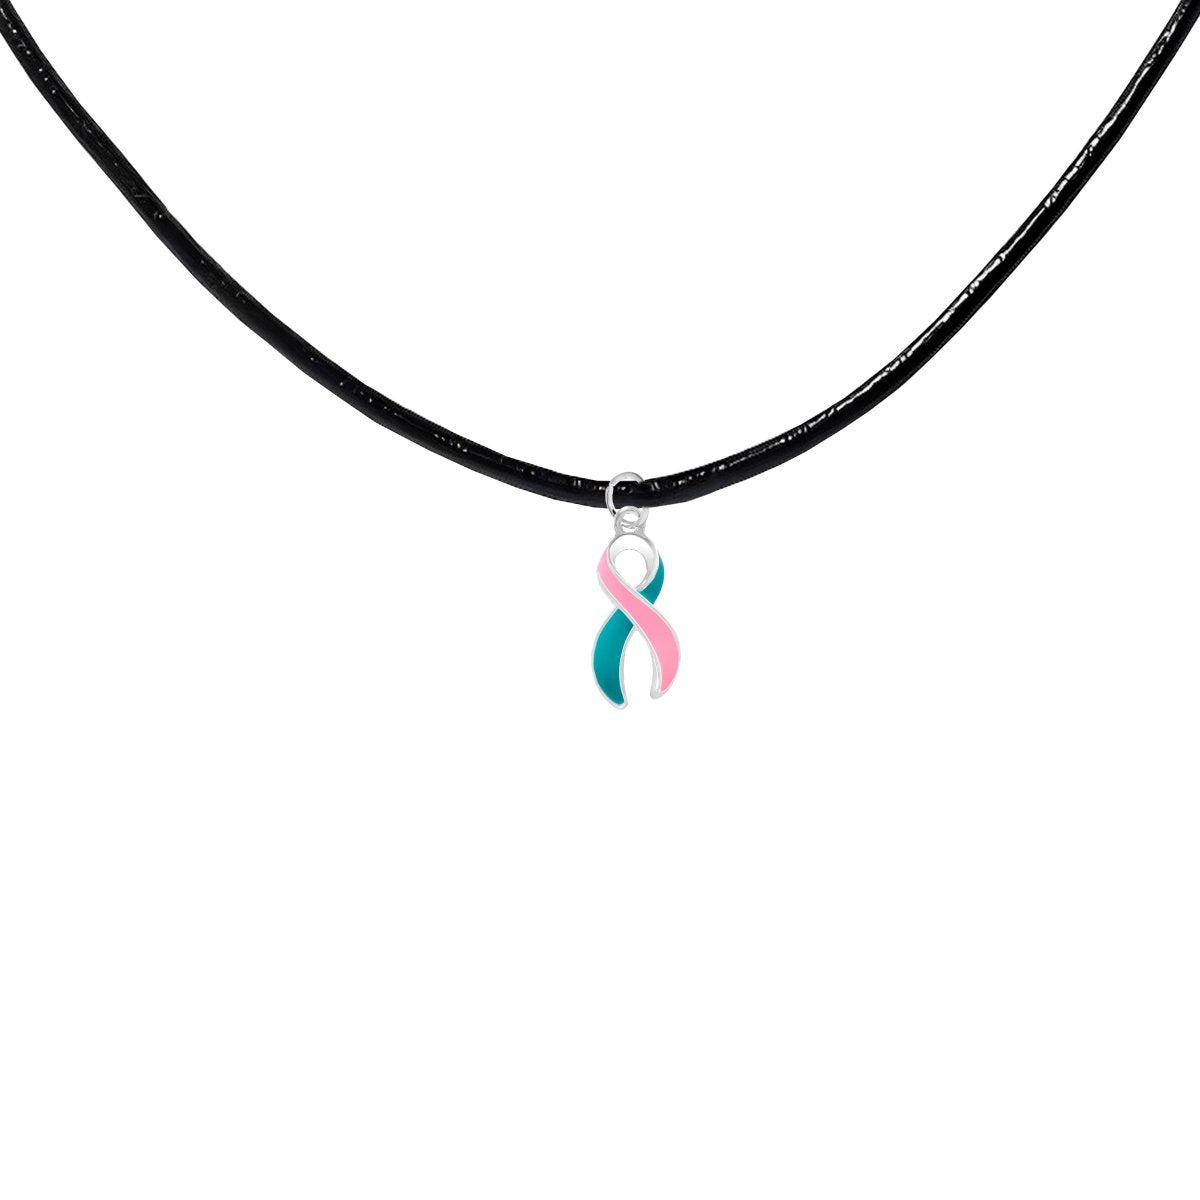 Large Pink & Teal Ribbon Awareness Black Cord Necklace - Fundraising For A Cause